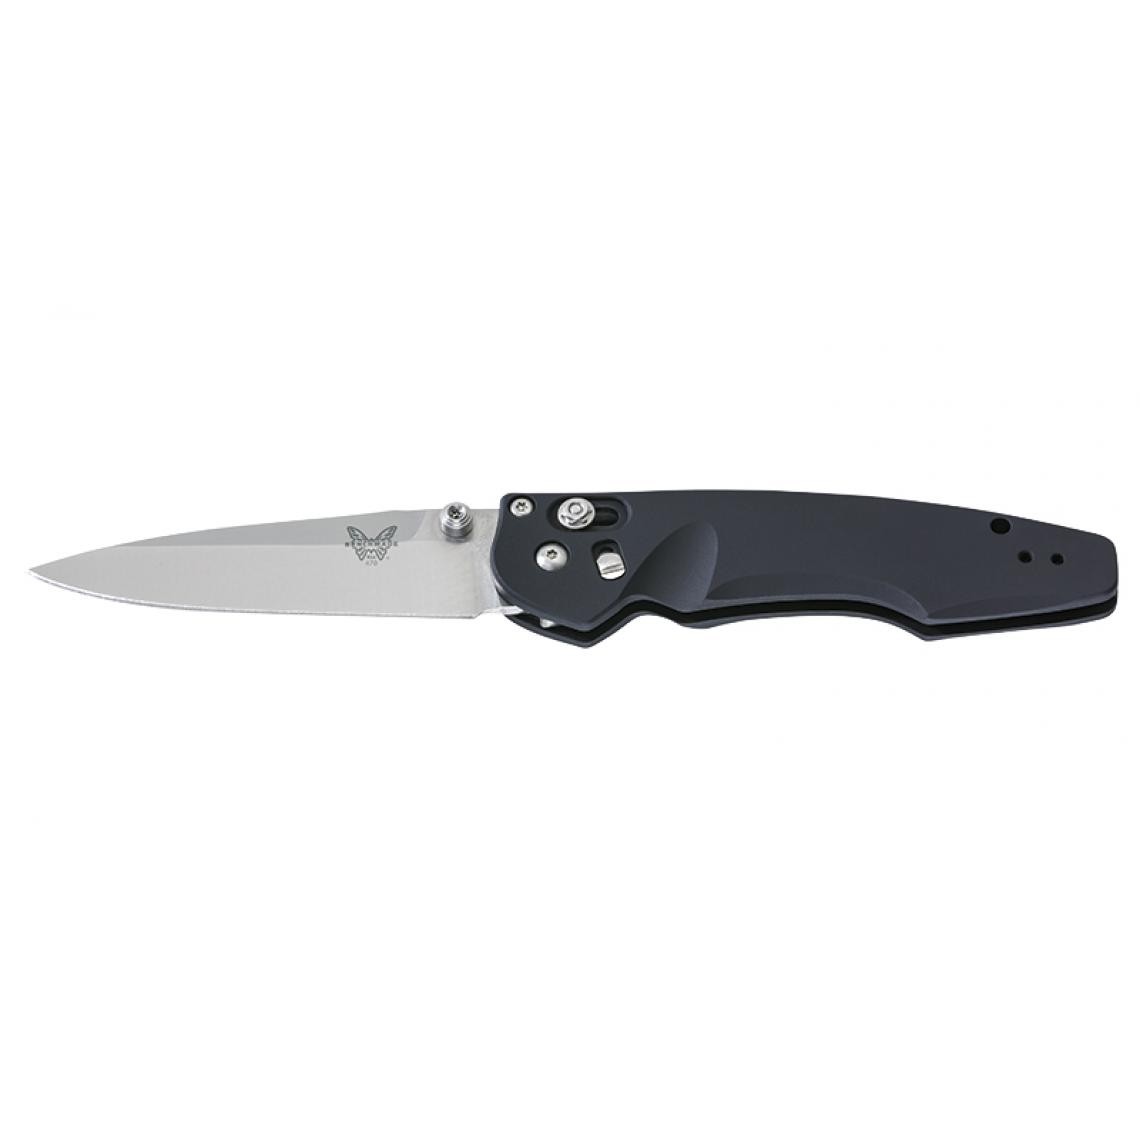 Divers Marques - BENCHMADE - BN470_1 - BENCHMADE - EMISSARY - Outils de coupe